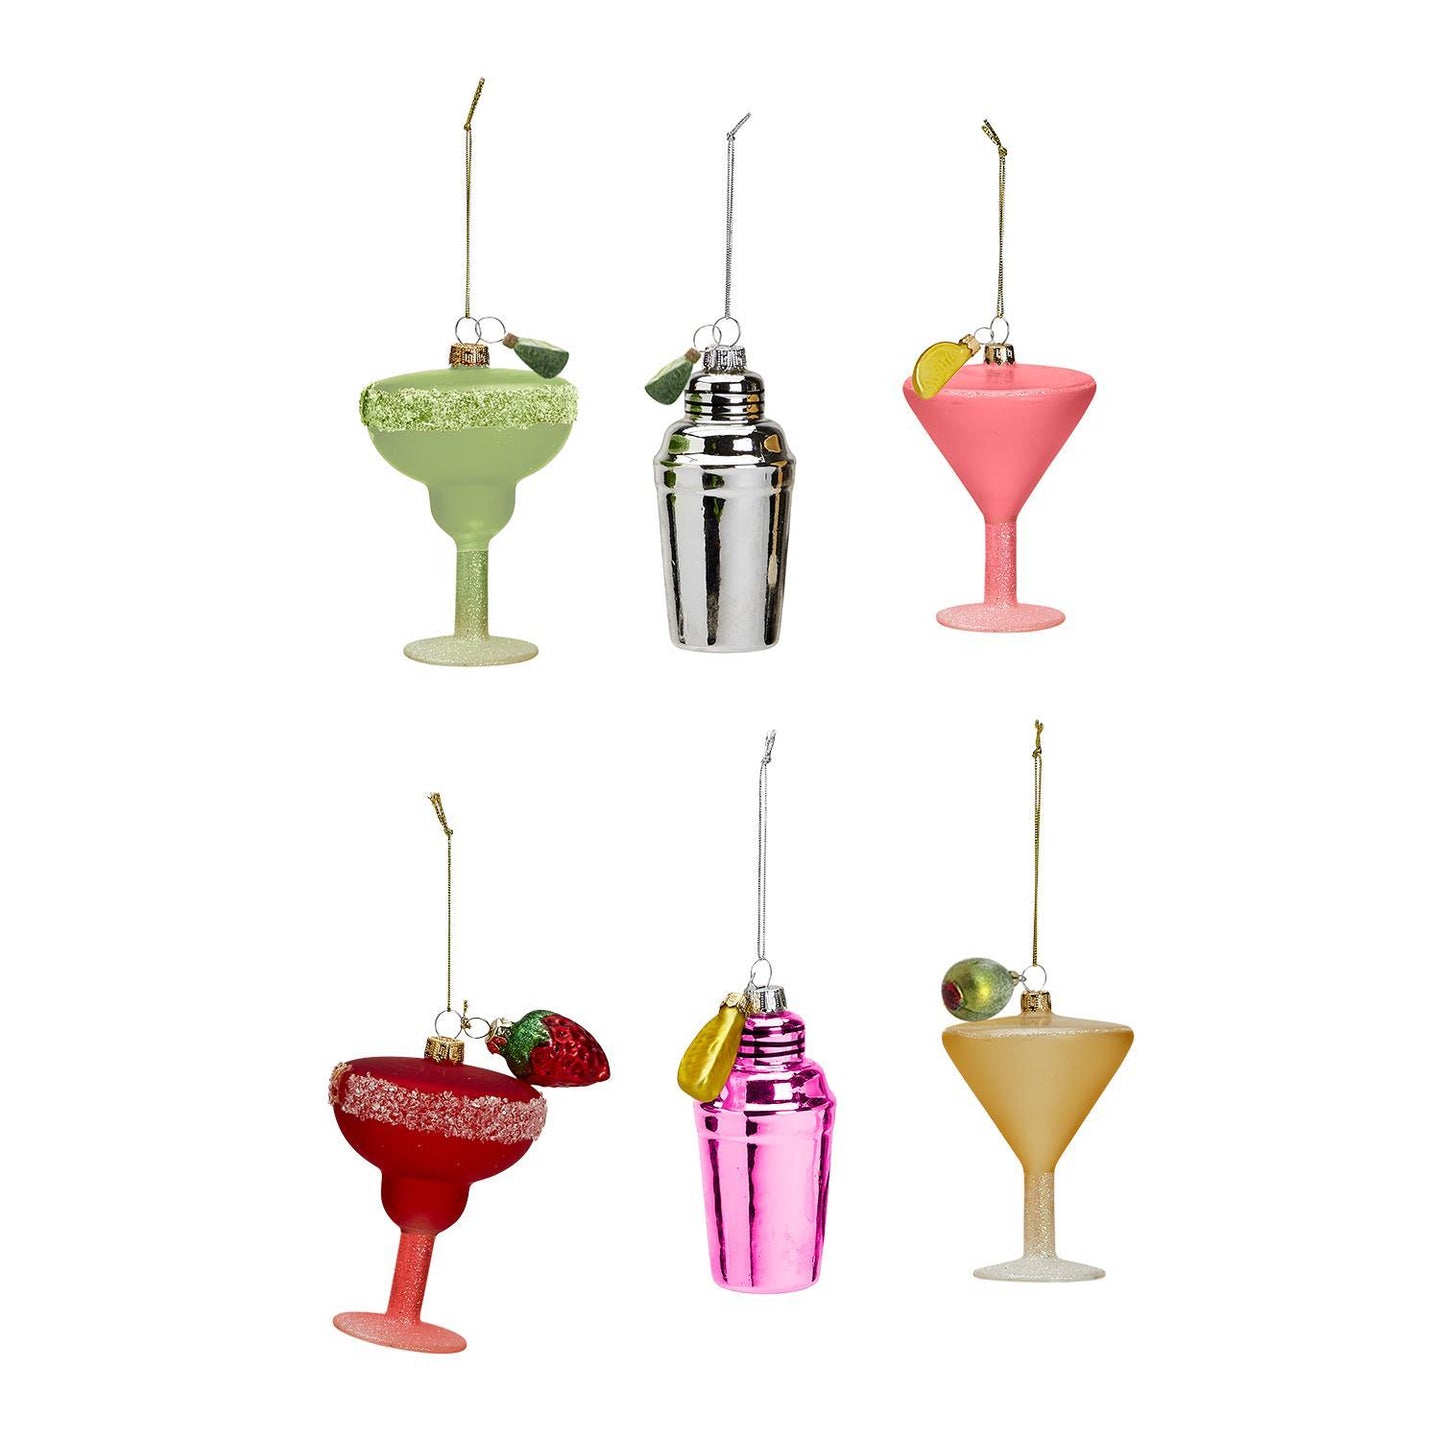 COCKTAIL HOUR 24 PC ORNAMENT WITH GLASS CHARM UNIT INCLUDES 3 DESIGNS